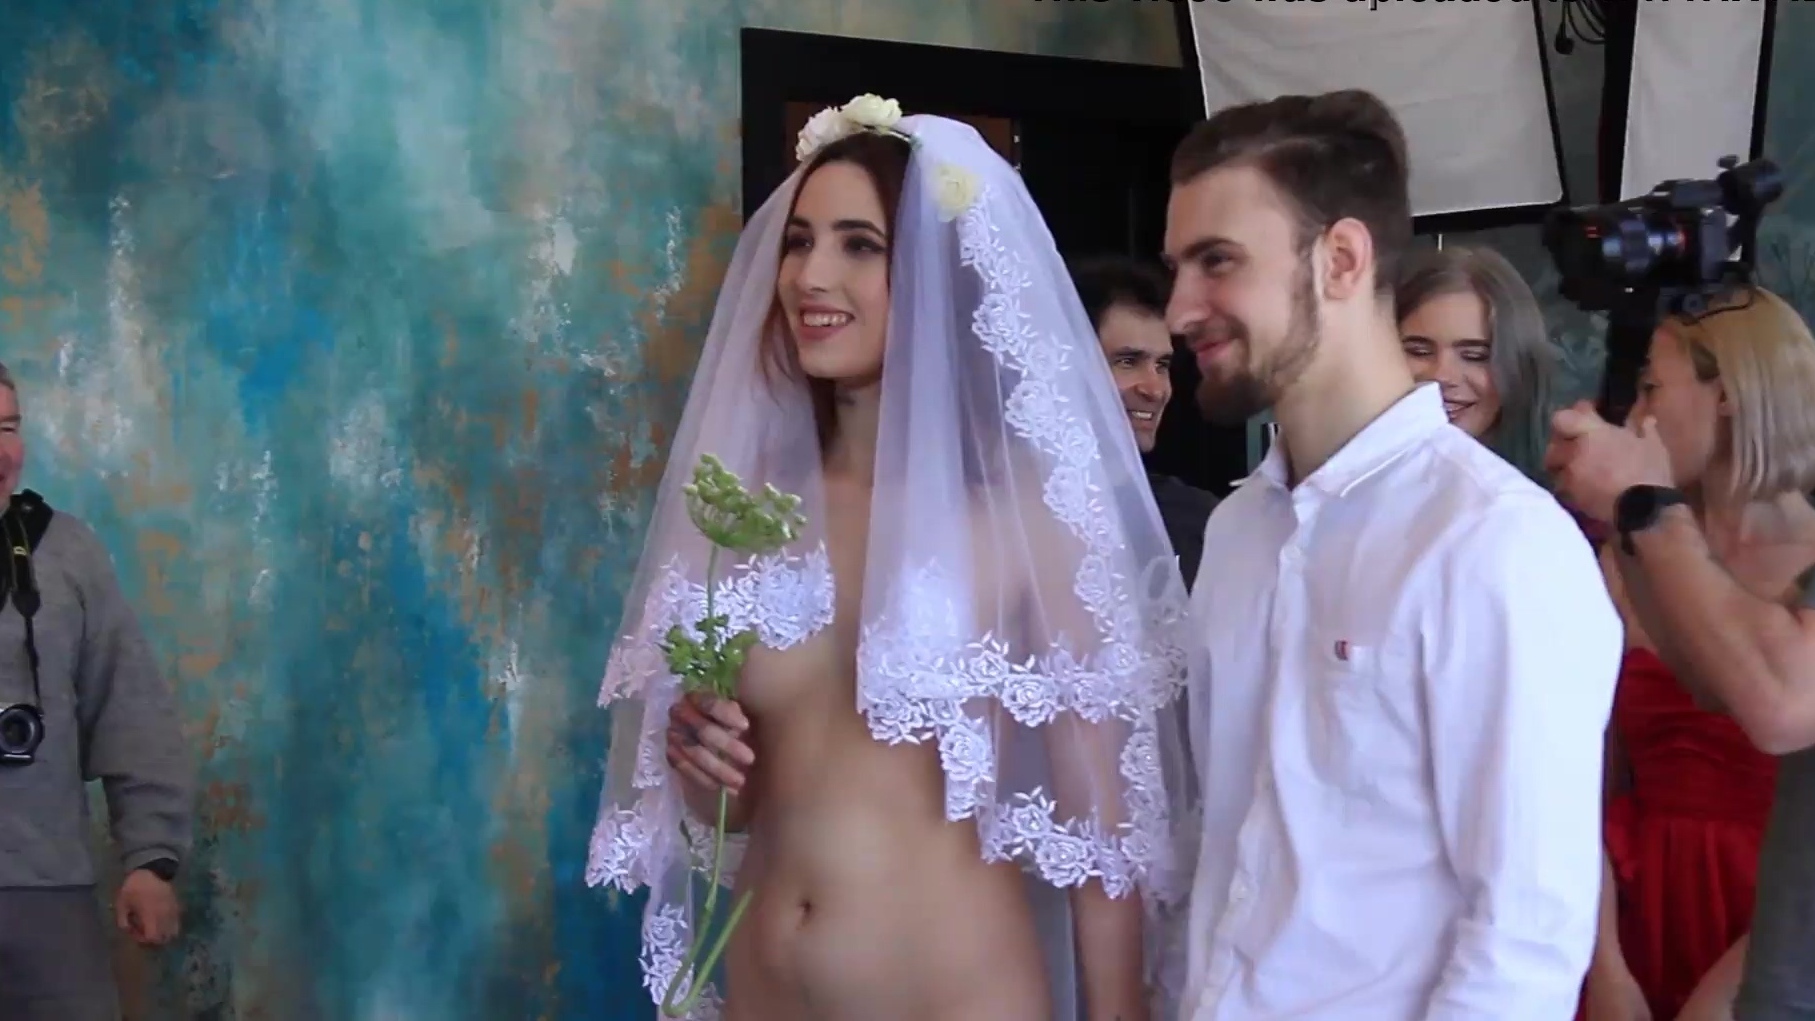 Crazy Russian wedding with Nude Bride pic